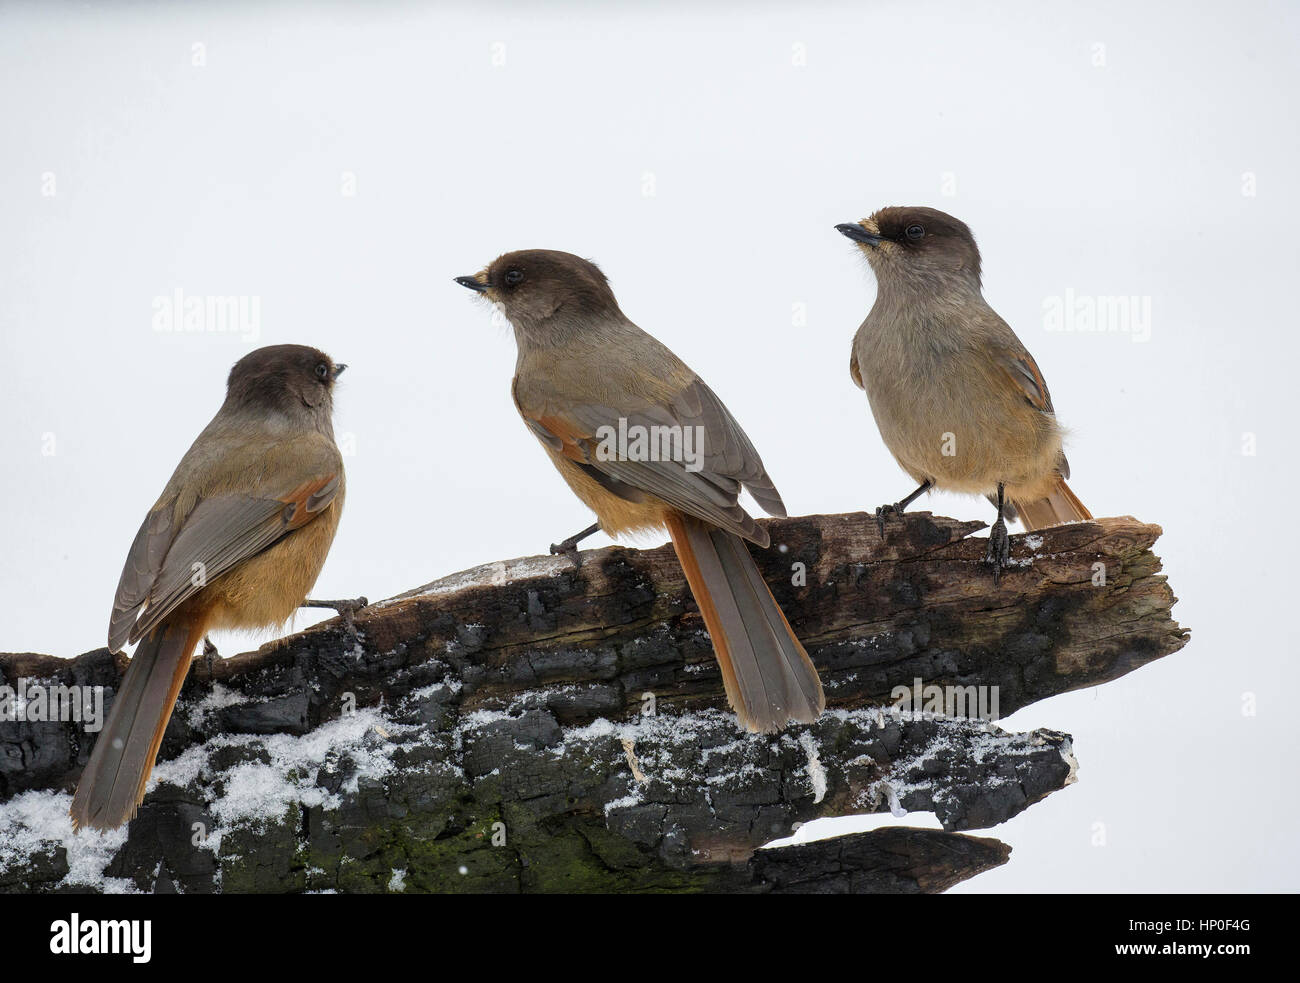 A group of three Siberian Jays (Perisoreus infaustus) sitting on a log in the snow, whilst it is snowing Stock Photo